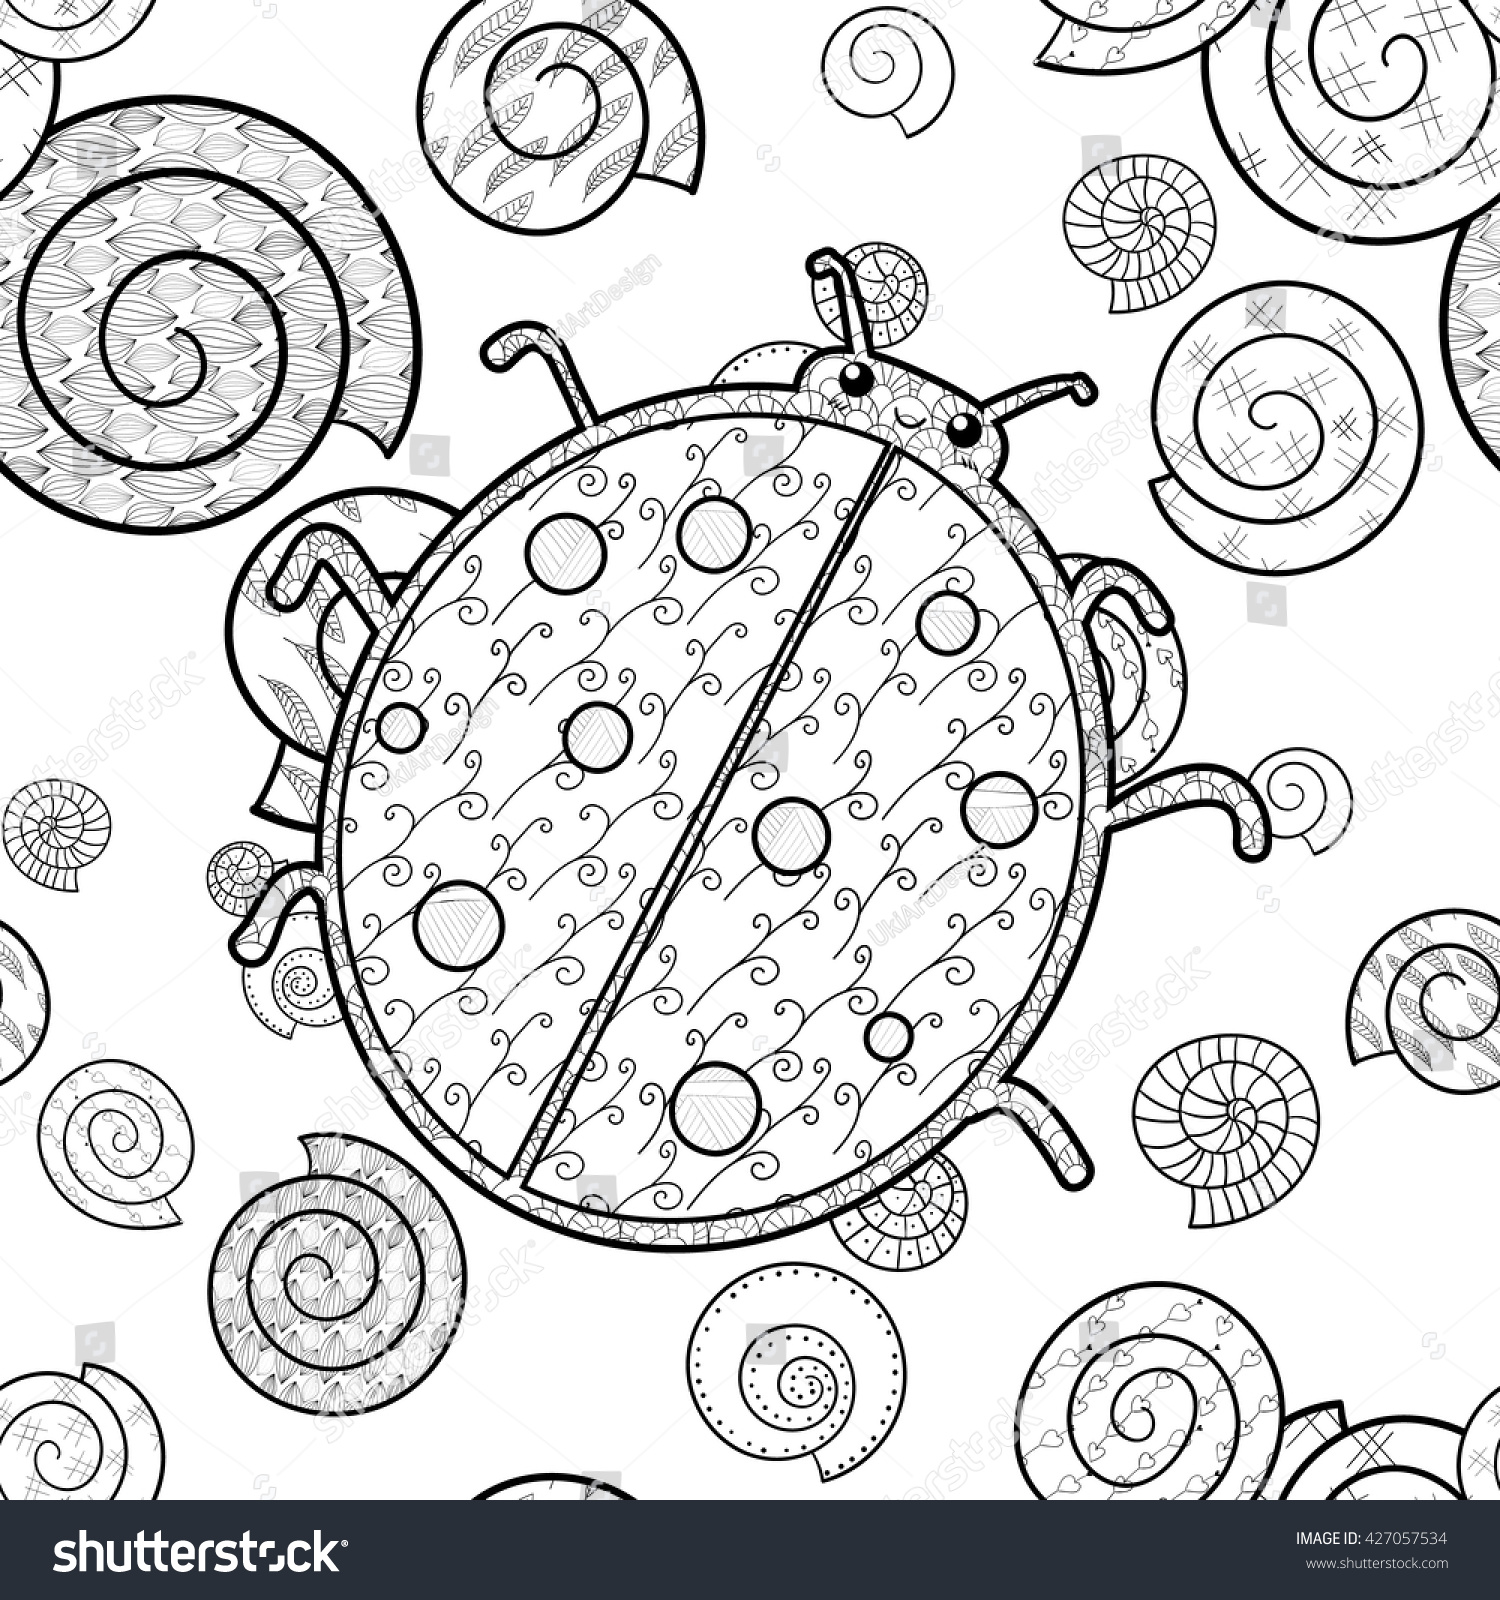 Download Adult Coloring Page Cute Ladybug Shells Stock Vector ...